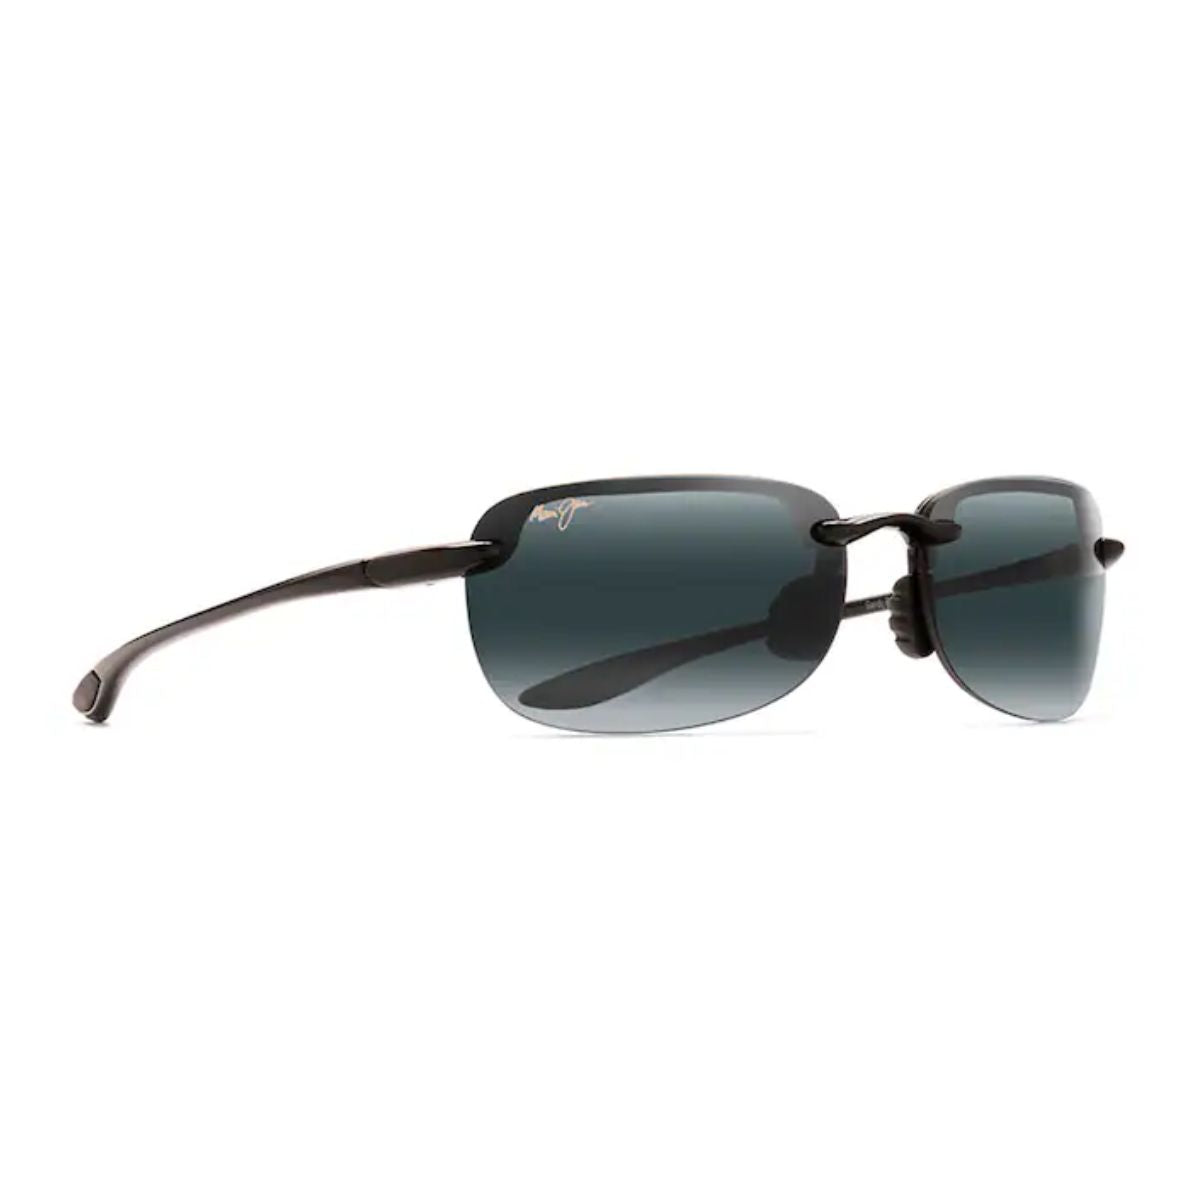 "Shop Stylish Maui Jim Polarized Goggles For Mens At Optorium Online Store | Mens Offer Sunglasses"